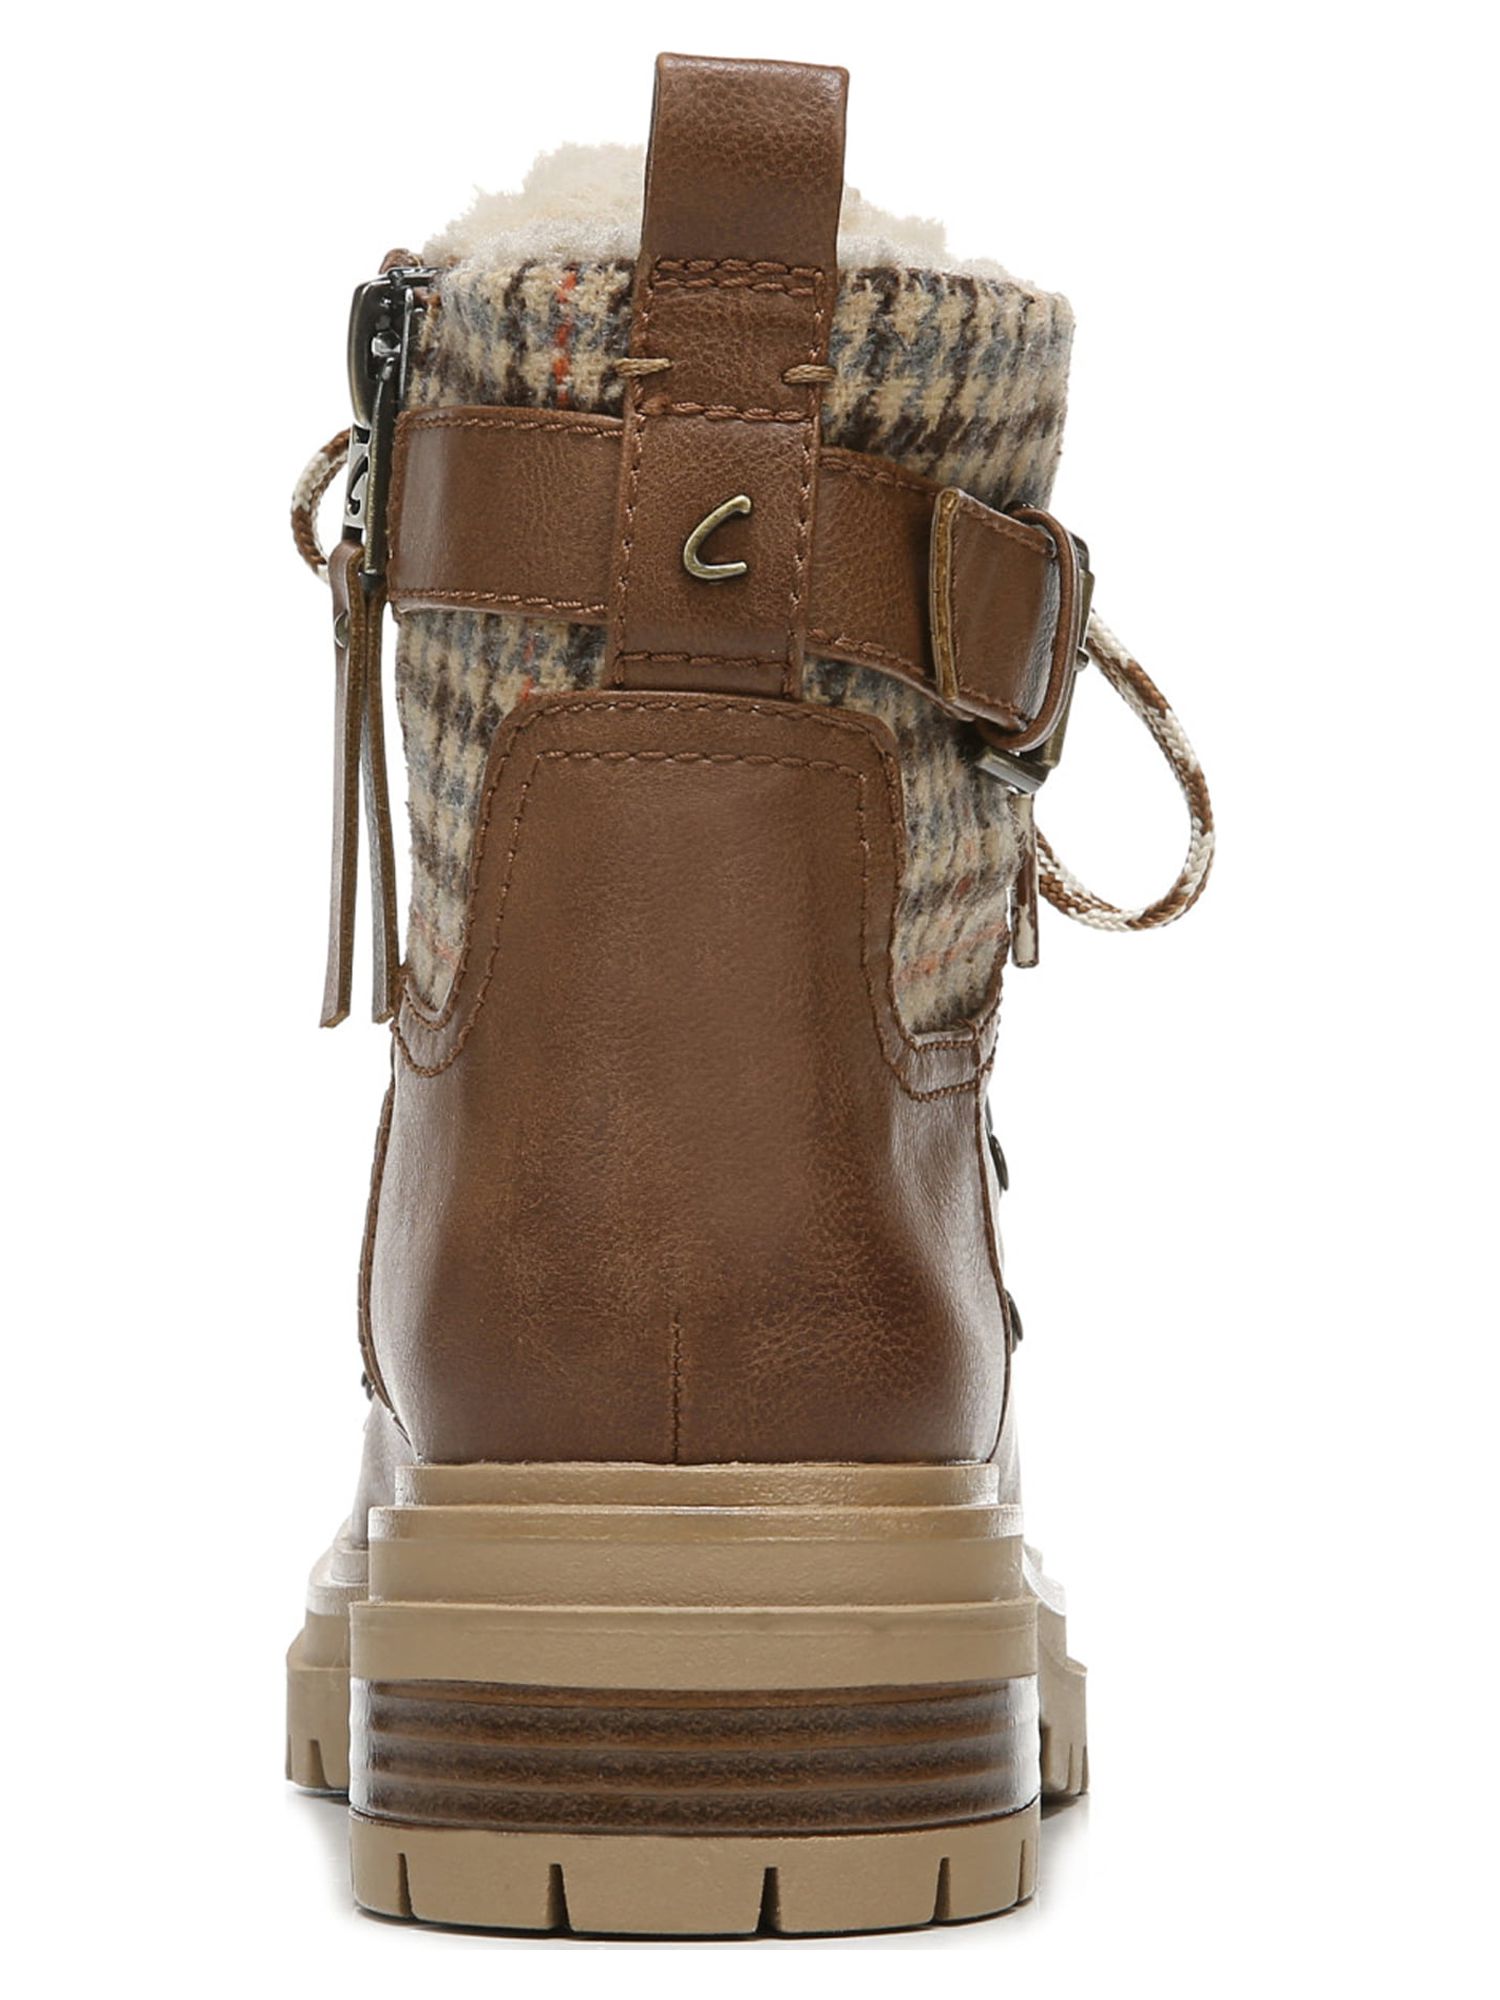 Circus by Sam Edelman Women's Gretchen Shearling Hiker Boot - image 2 of 5